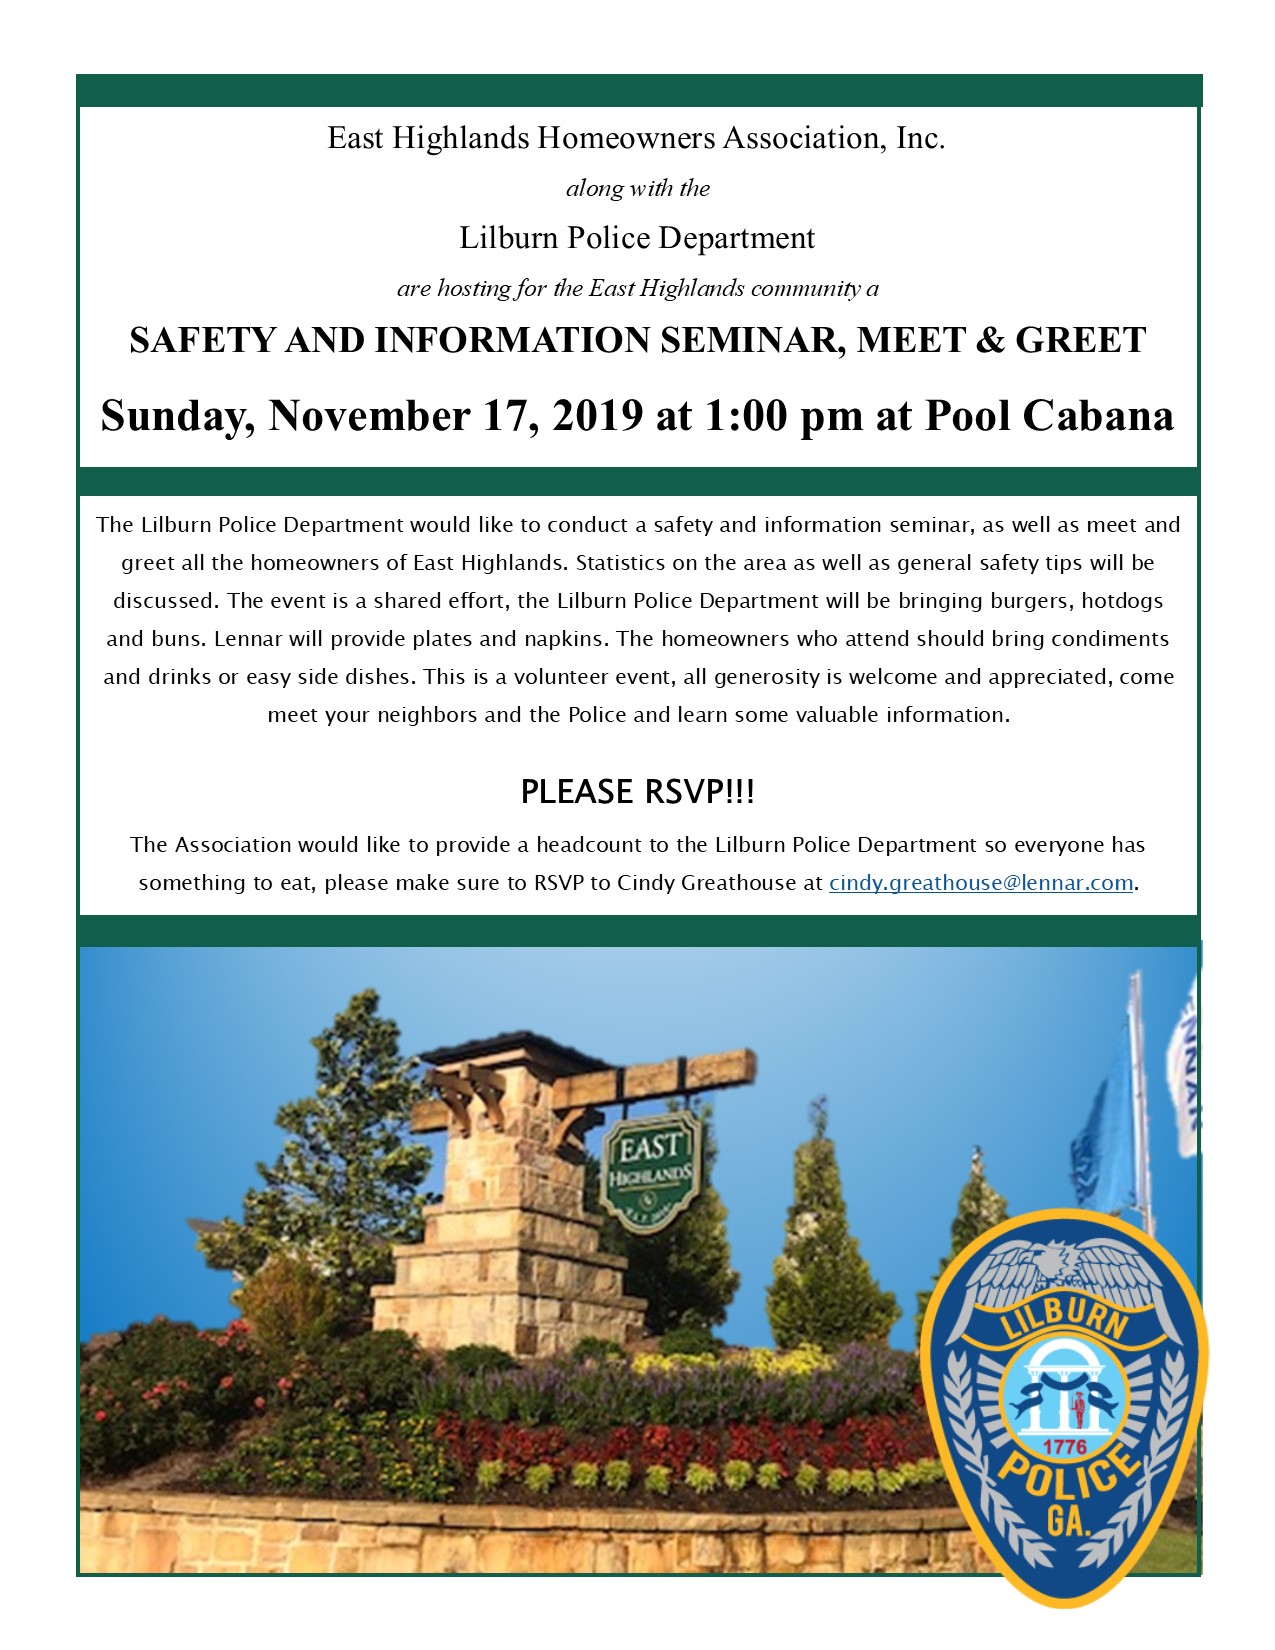 EAST HIGHLANDS LILBURN POLICE MEET AND GREET...11.17.19